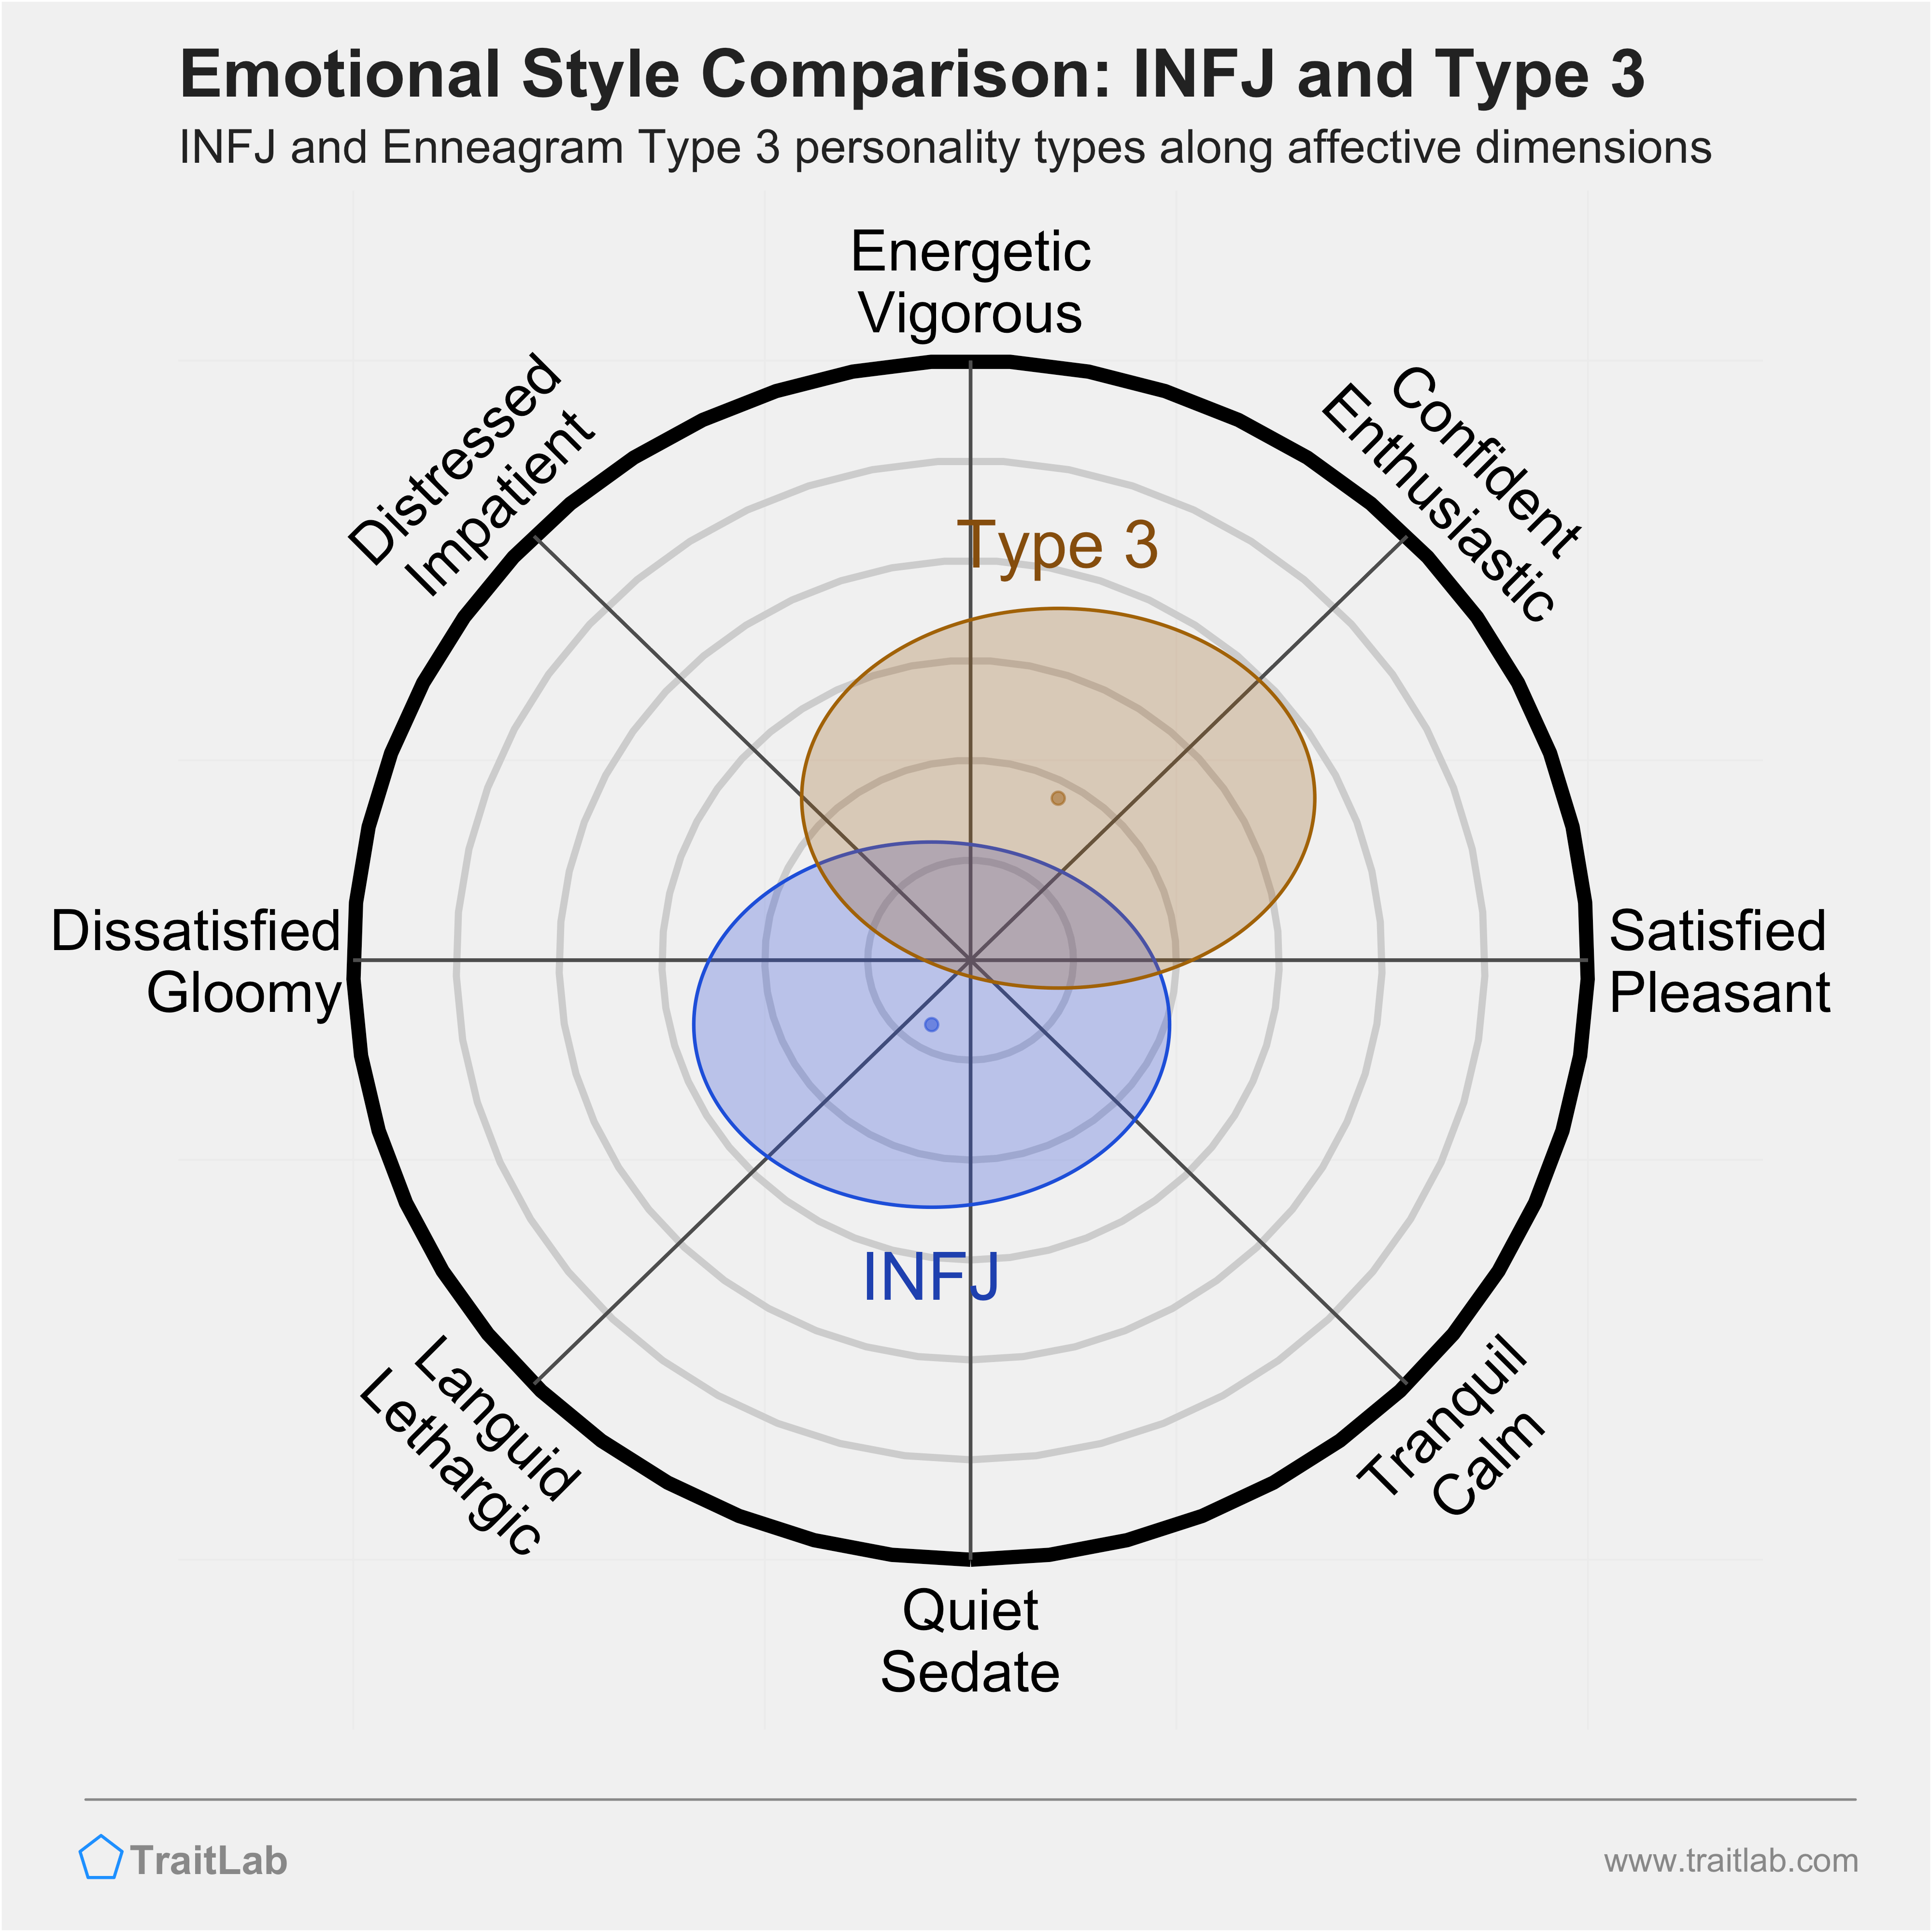 INFJ and Type 3 comparison across emotional (affective) dimensions